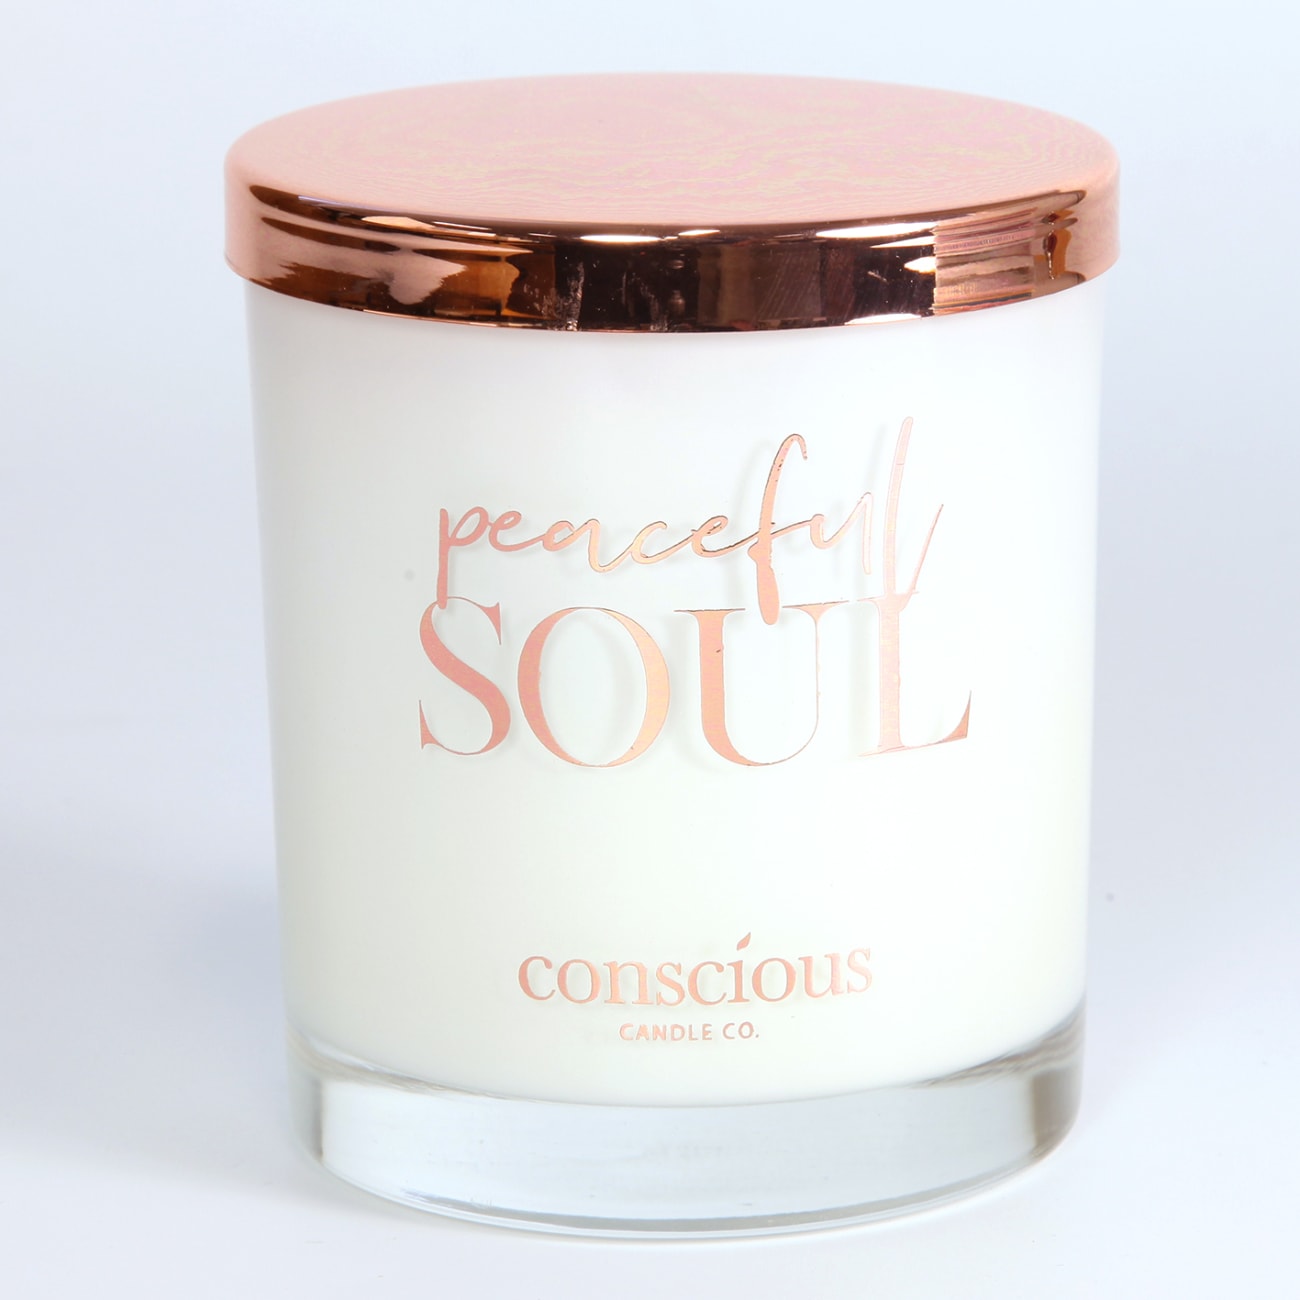 Luxury Soy Candle: Peaceful Soul Moroccan Cedar and Sage, 55+ Hours Burn Time (John 14:27) Homeware